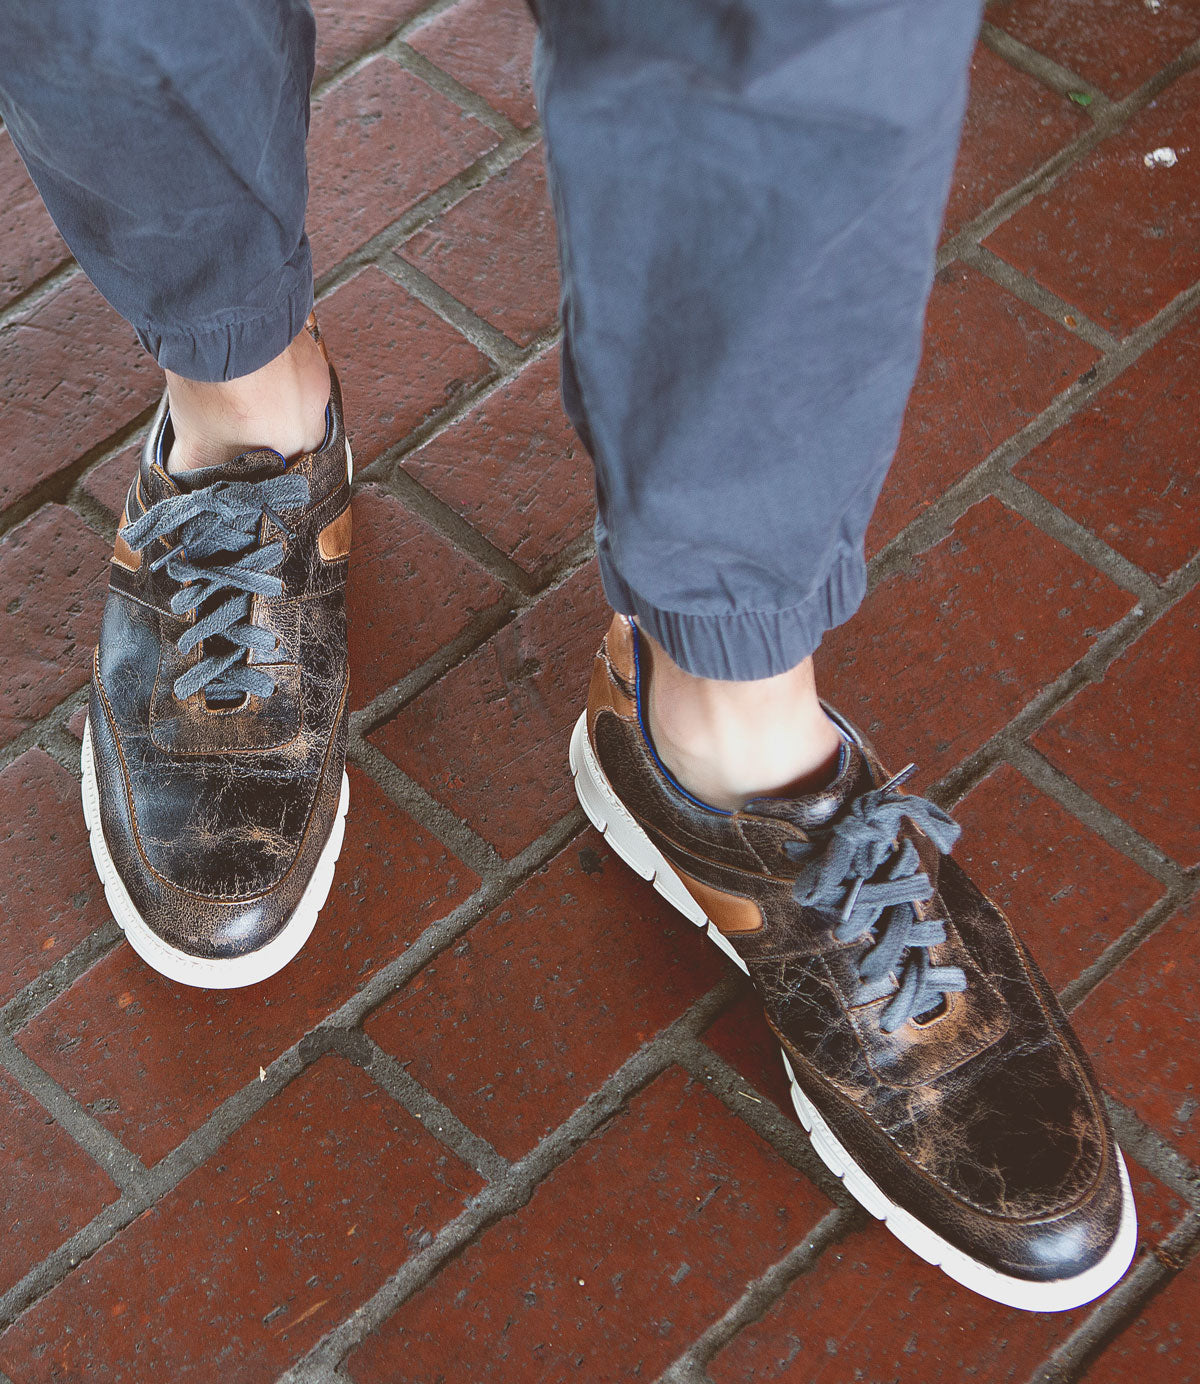 Person wearing navy blue joggers and distressed Bed Stu Wardell lace-up sneakers with white soles, standing on a red brick pavement.